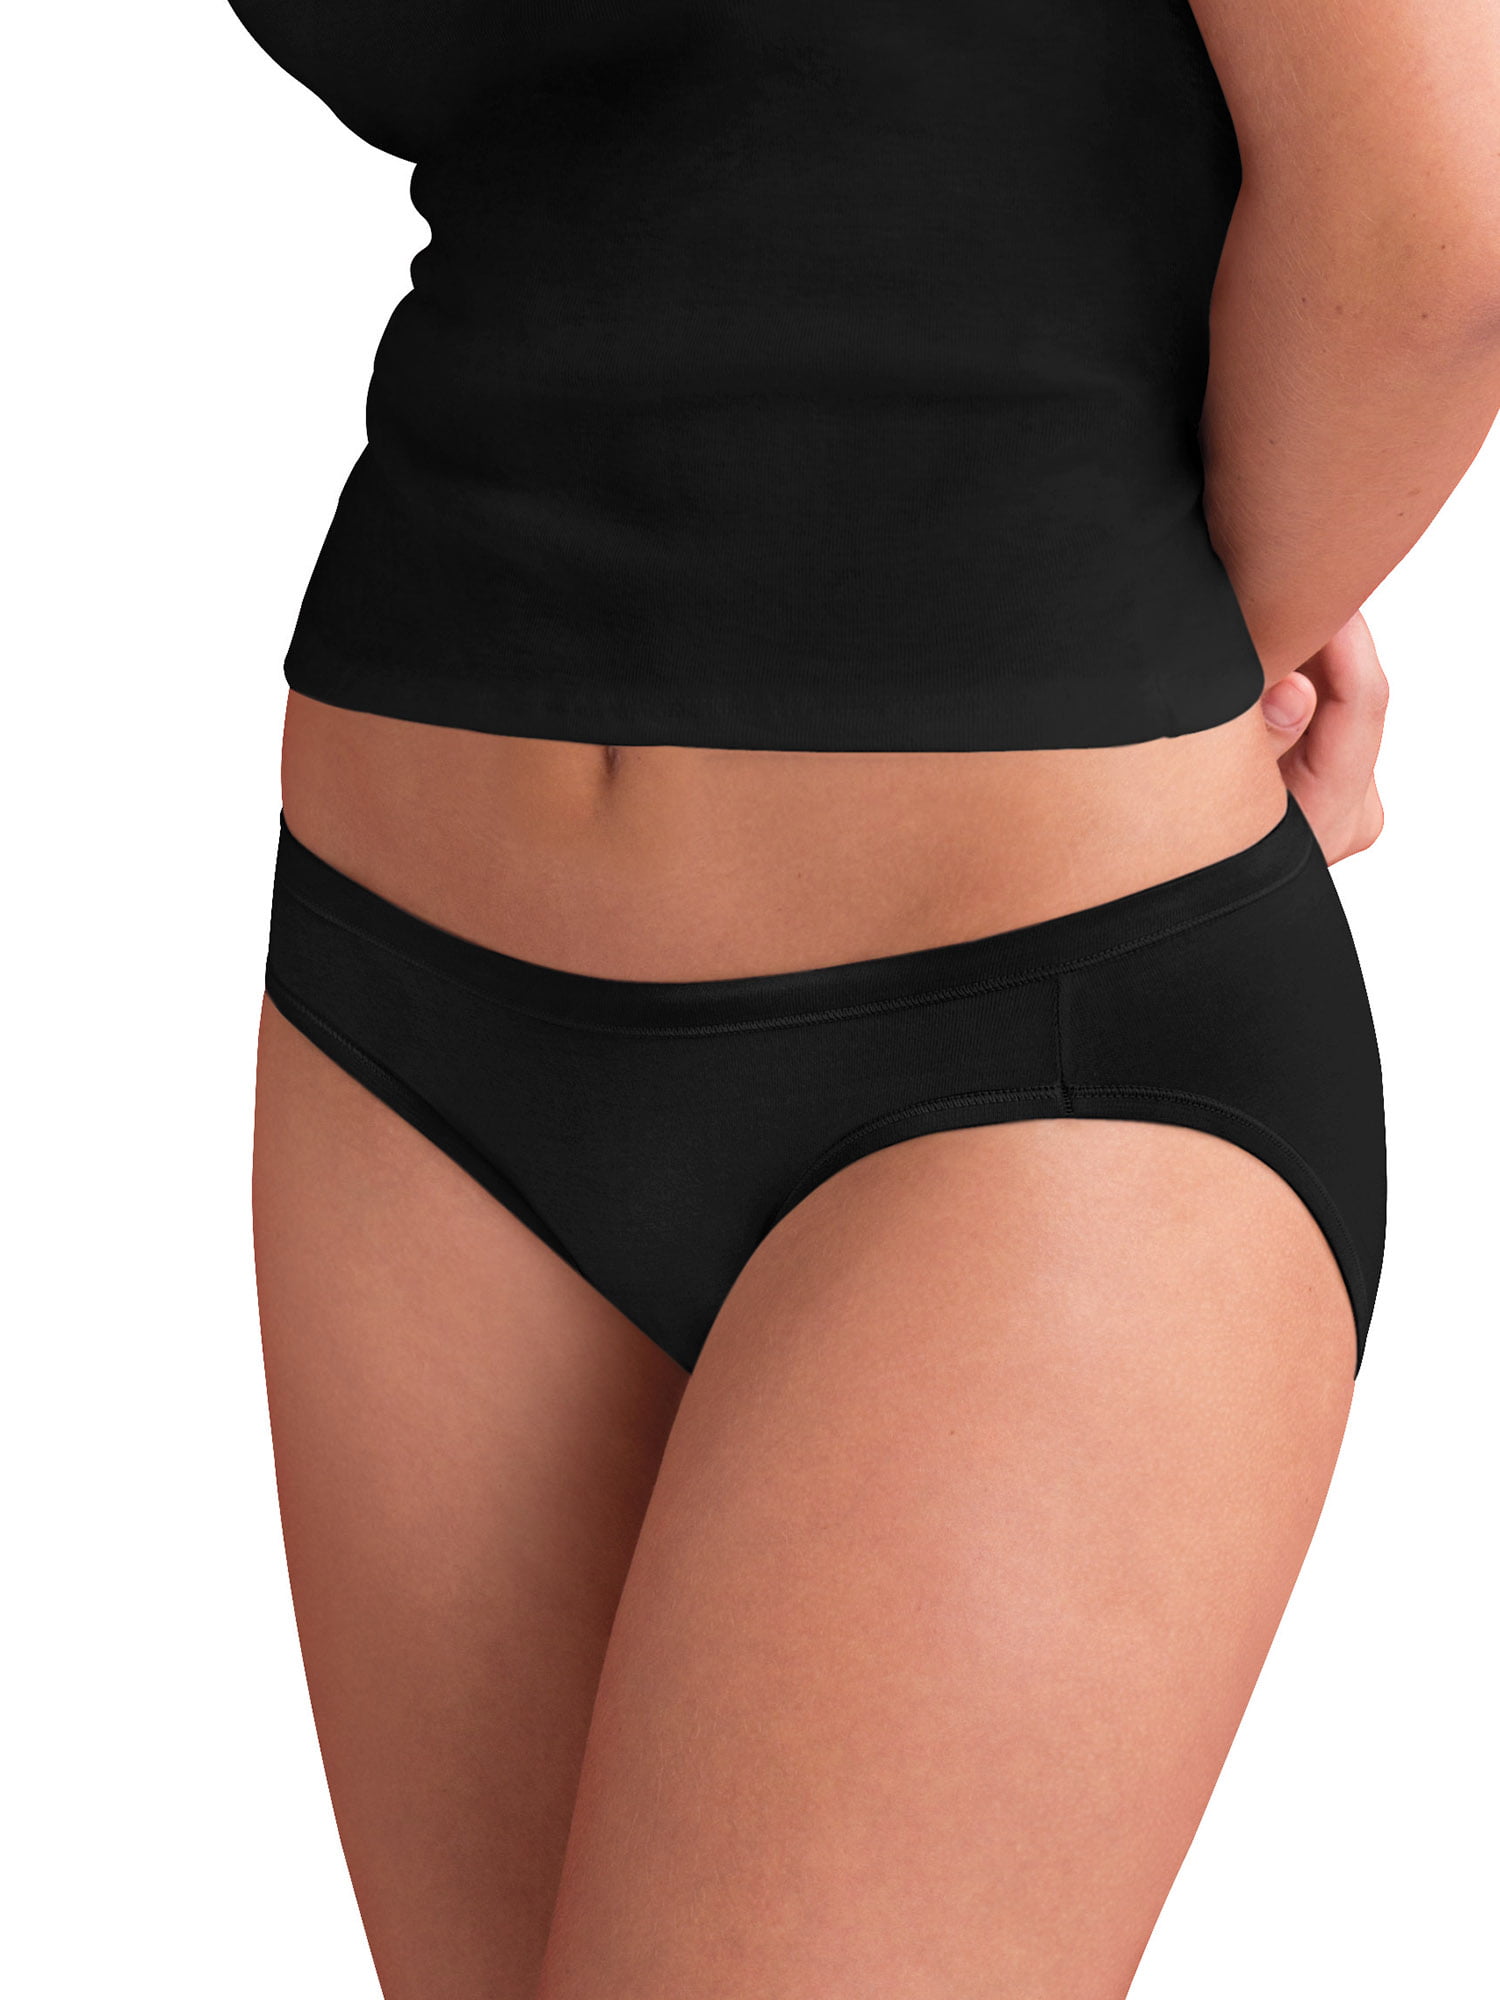 Wealurre Women's Cotton Stretch Bikini Panties Breathable Underwear 6 Pack (1801S,Black) at  Women's Clothing store